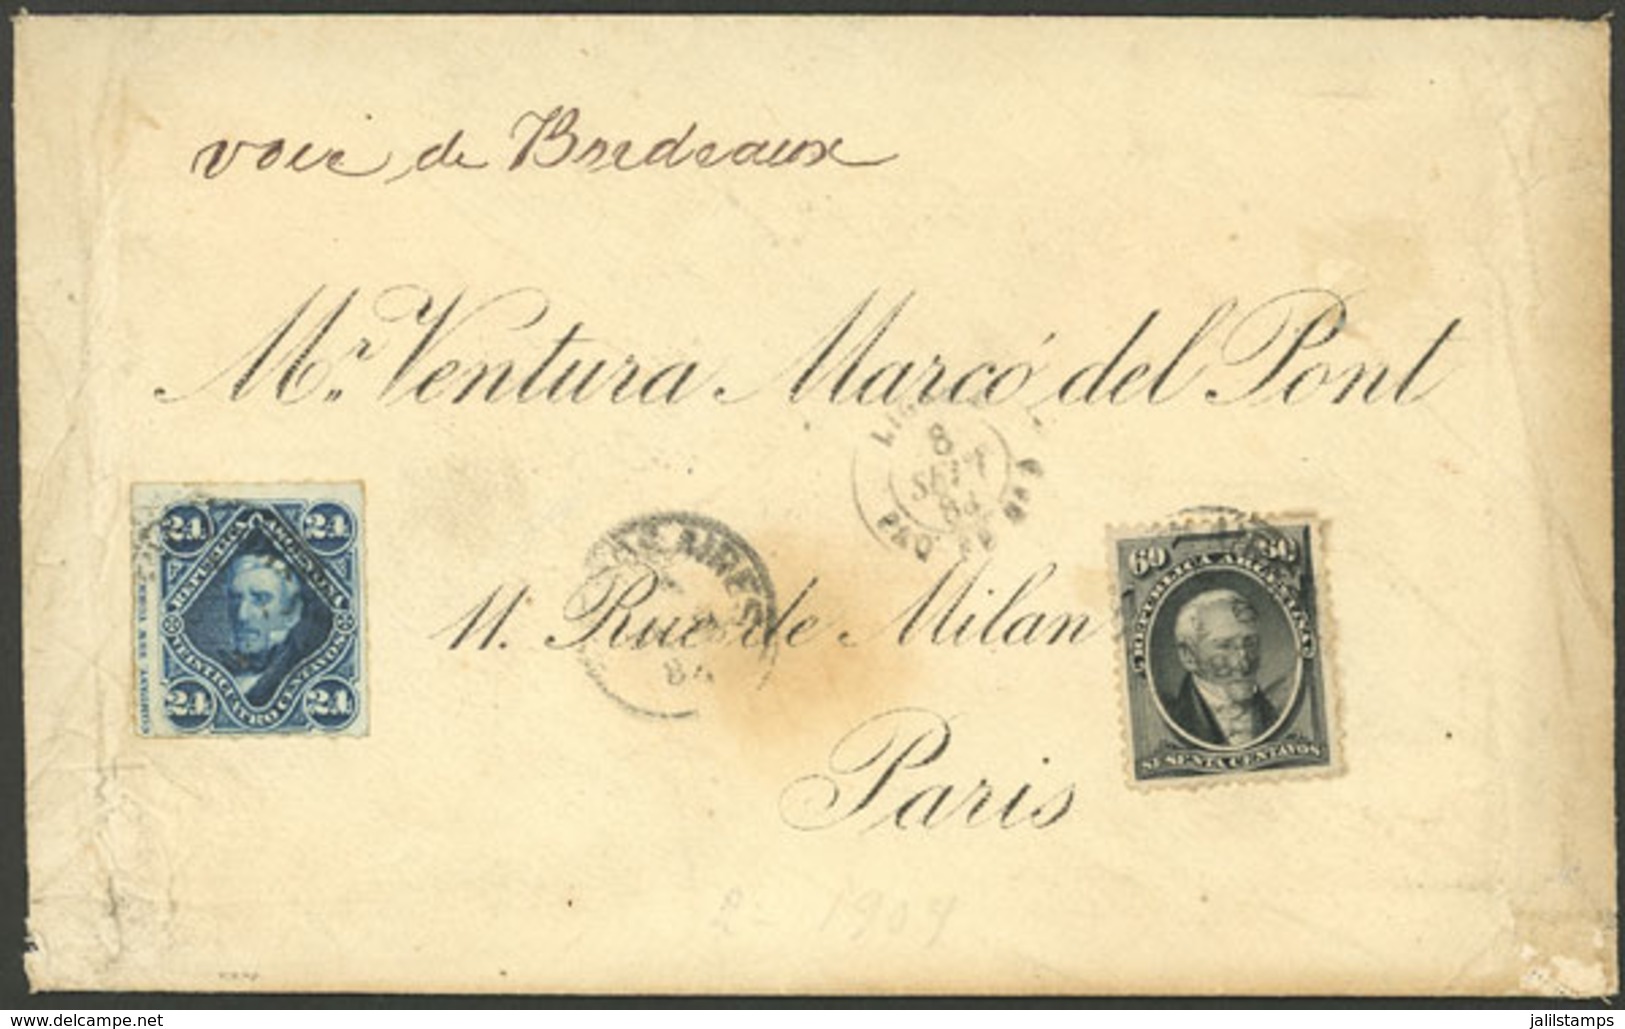 ARGENTINA: Cover Sent By French Paquebot From Buenos Aires To Paris On 8/SE/1883 With Large Postage Of 84c. Consisting O - Covers & Documents